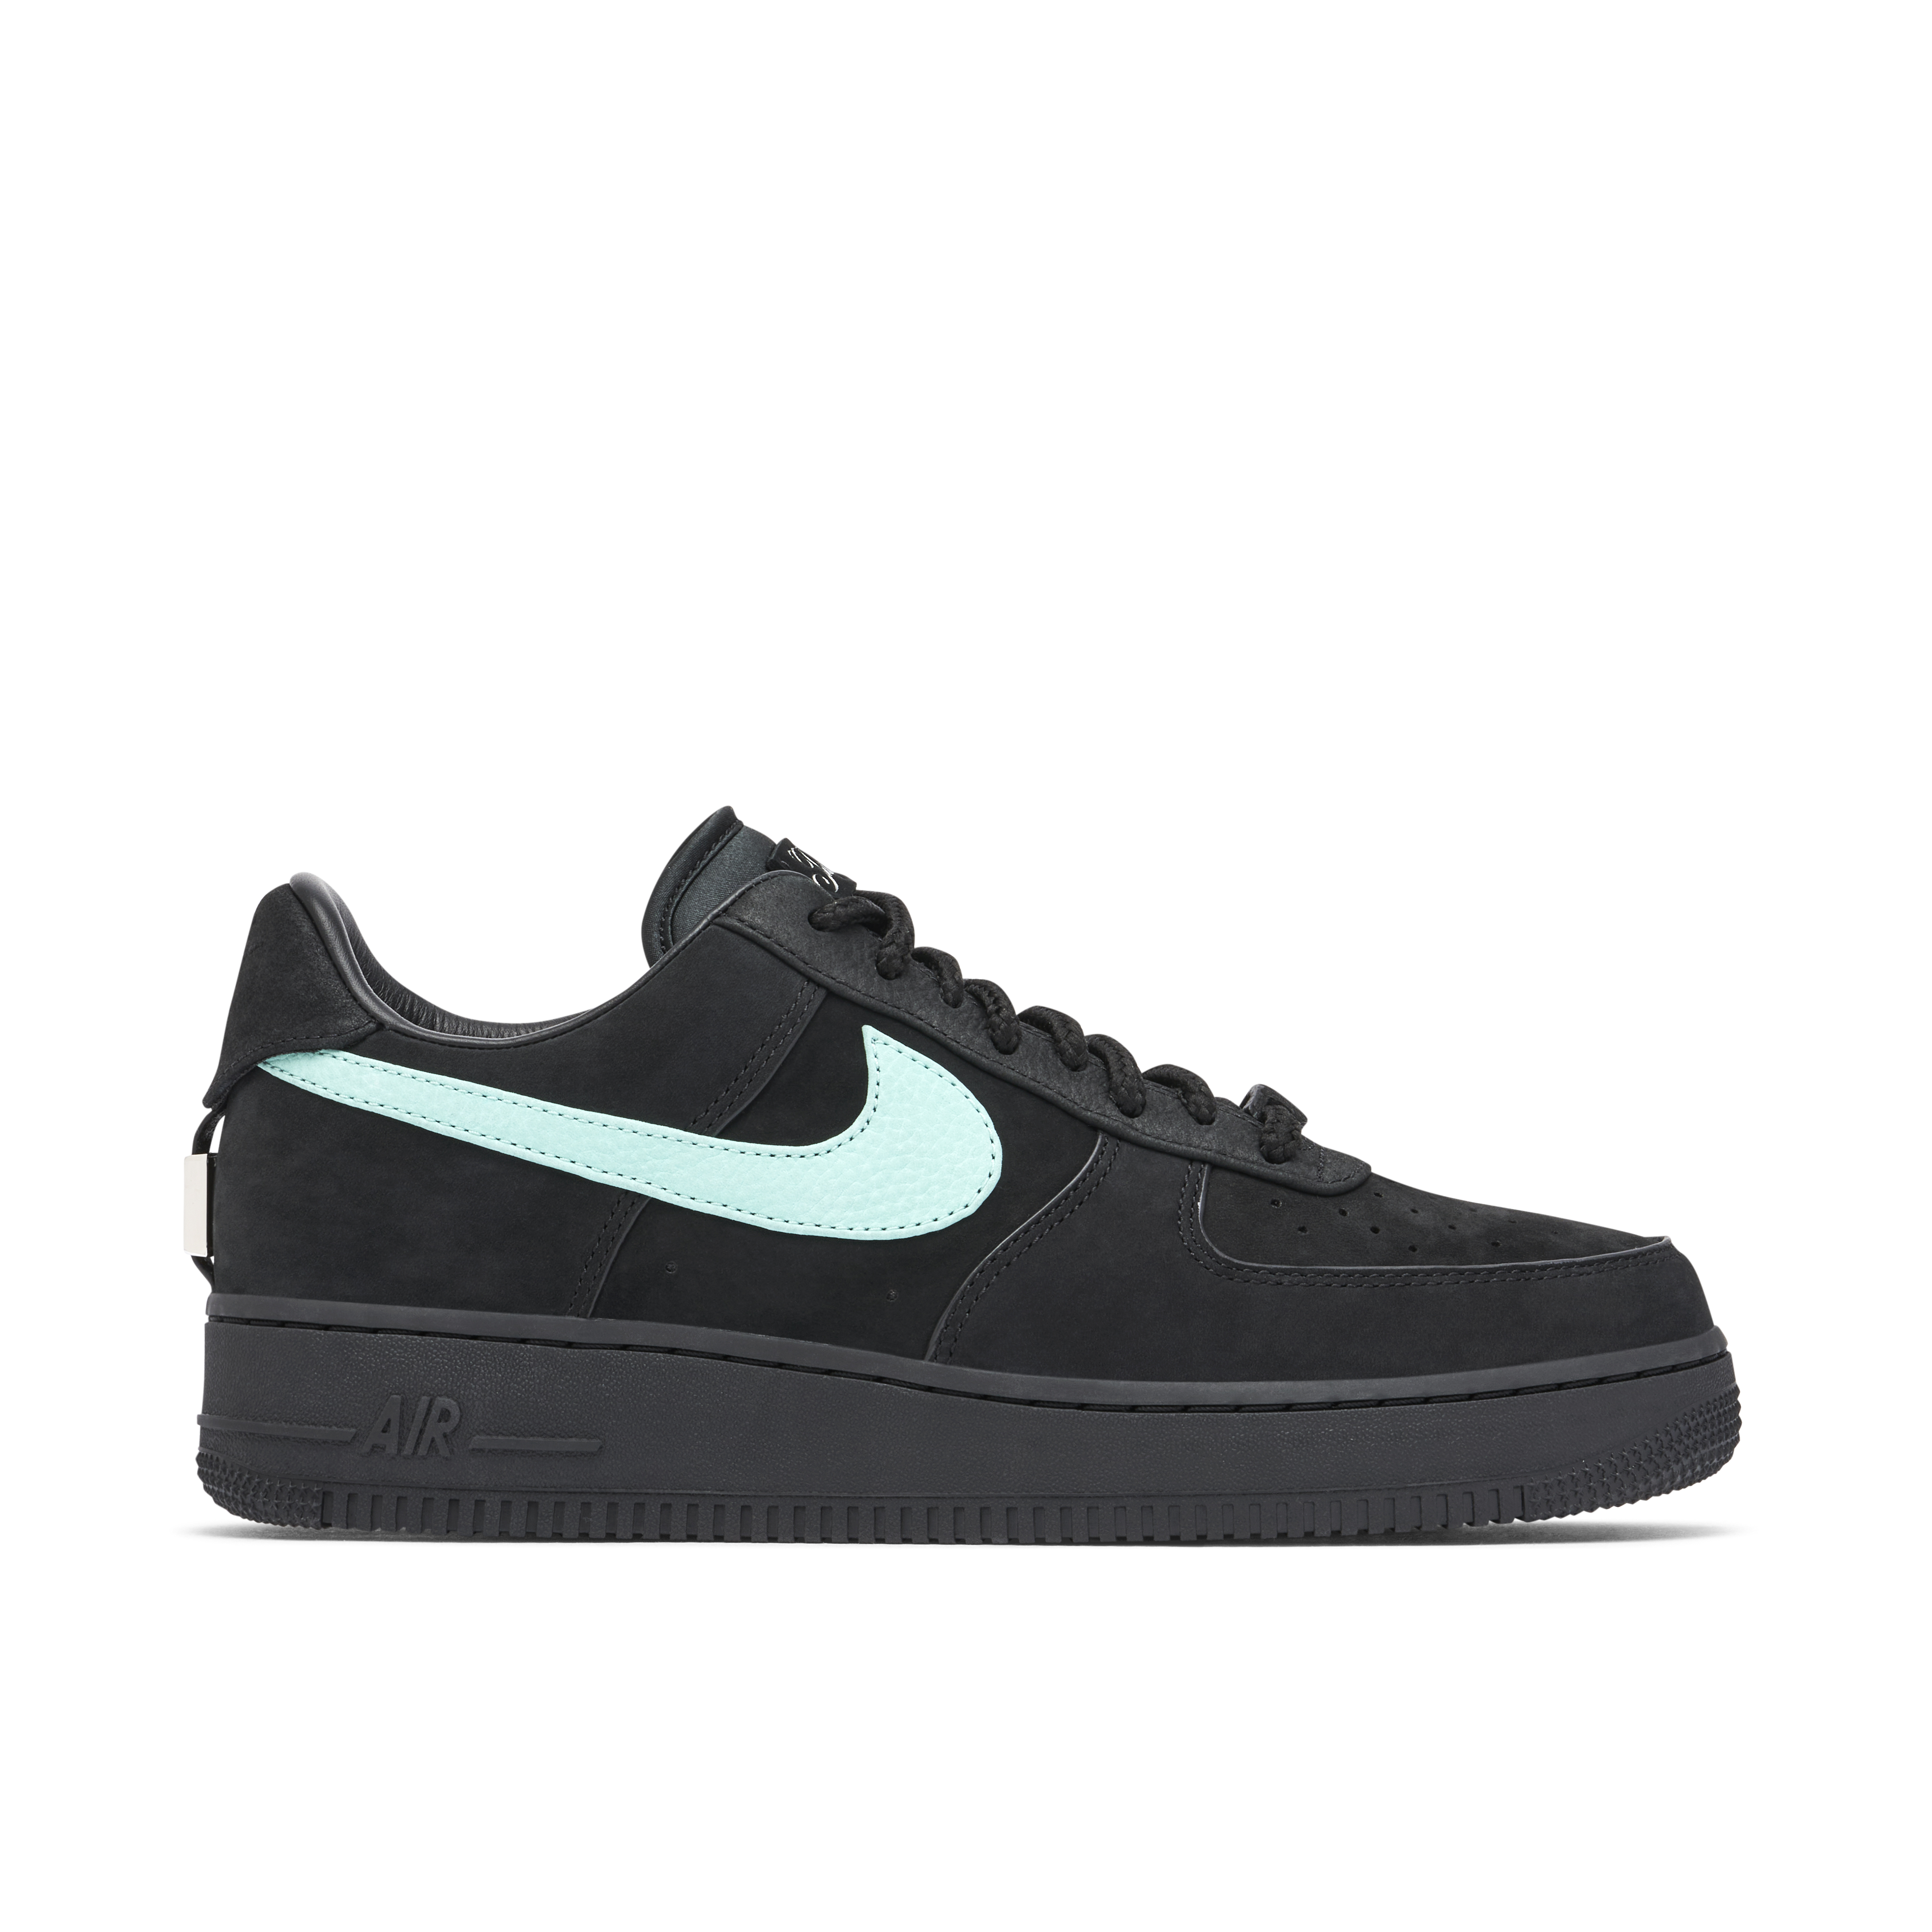 Louis Vuitton x Nike Air Force 1 Green size UK 8 (US 9) BRAND NEW